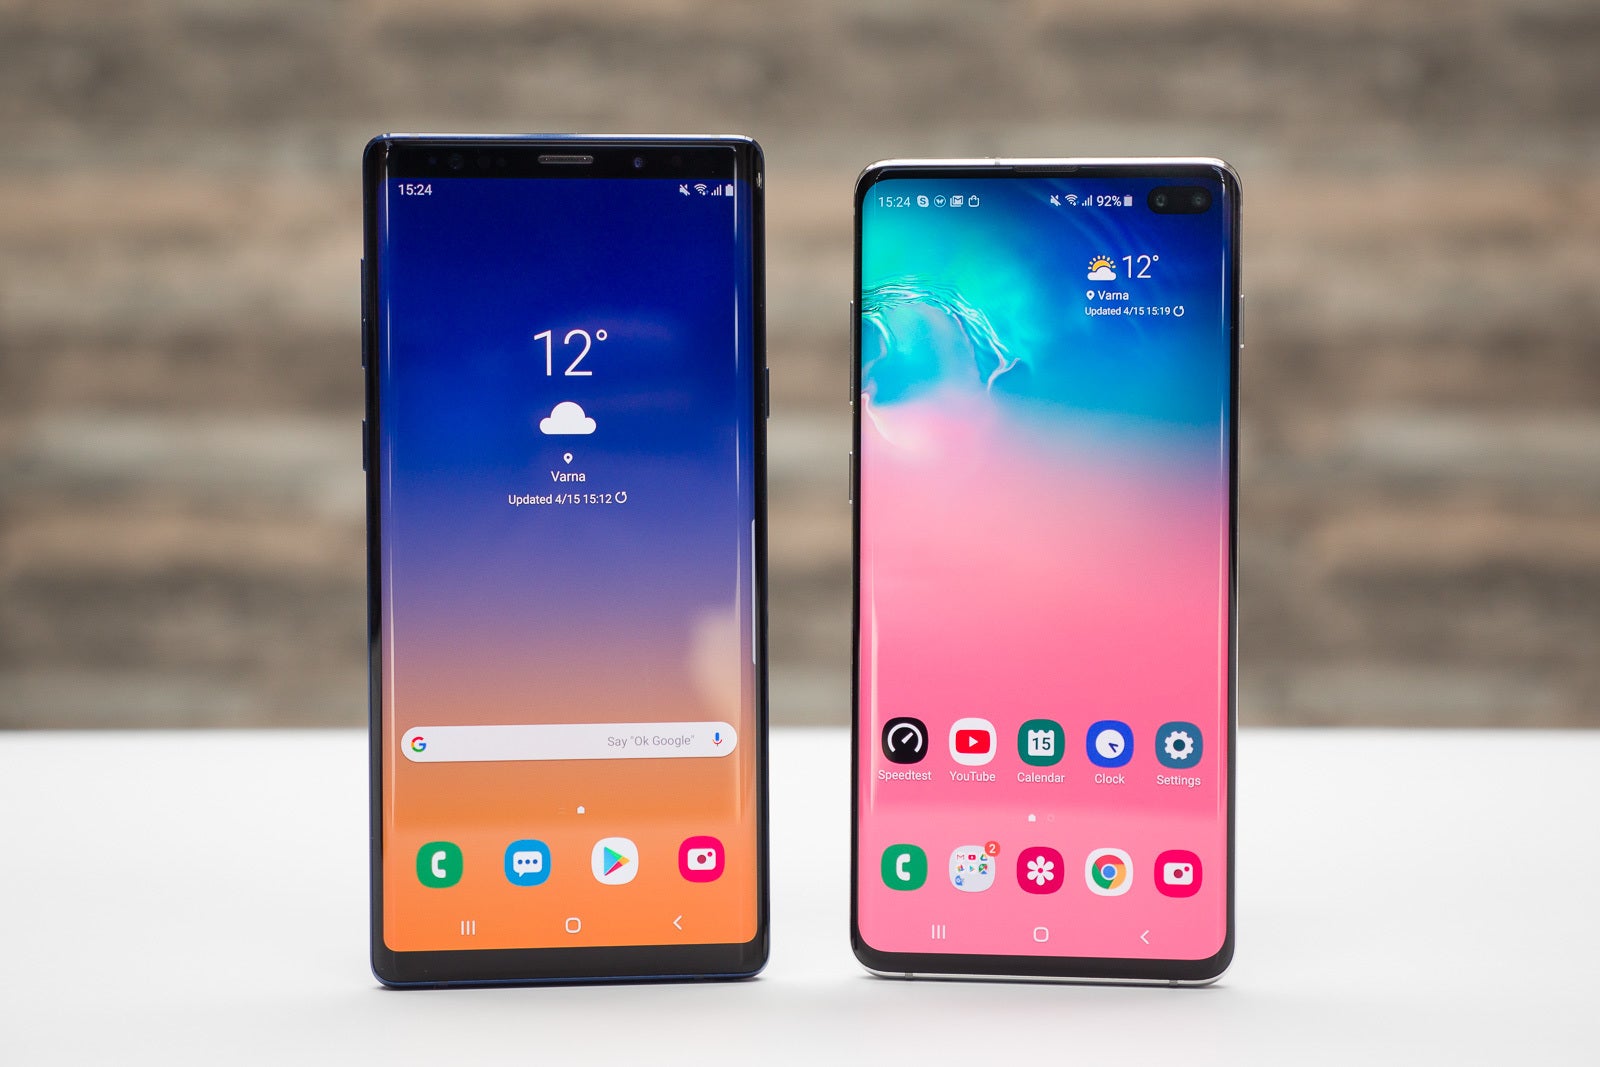 Samsung Galaxy S10+ vs. Galaxy Note 9 - The latest Galaxy Note 10 Pro leak just verified an important feature